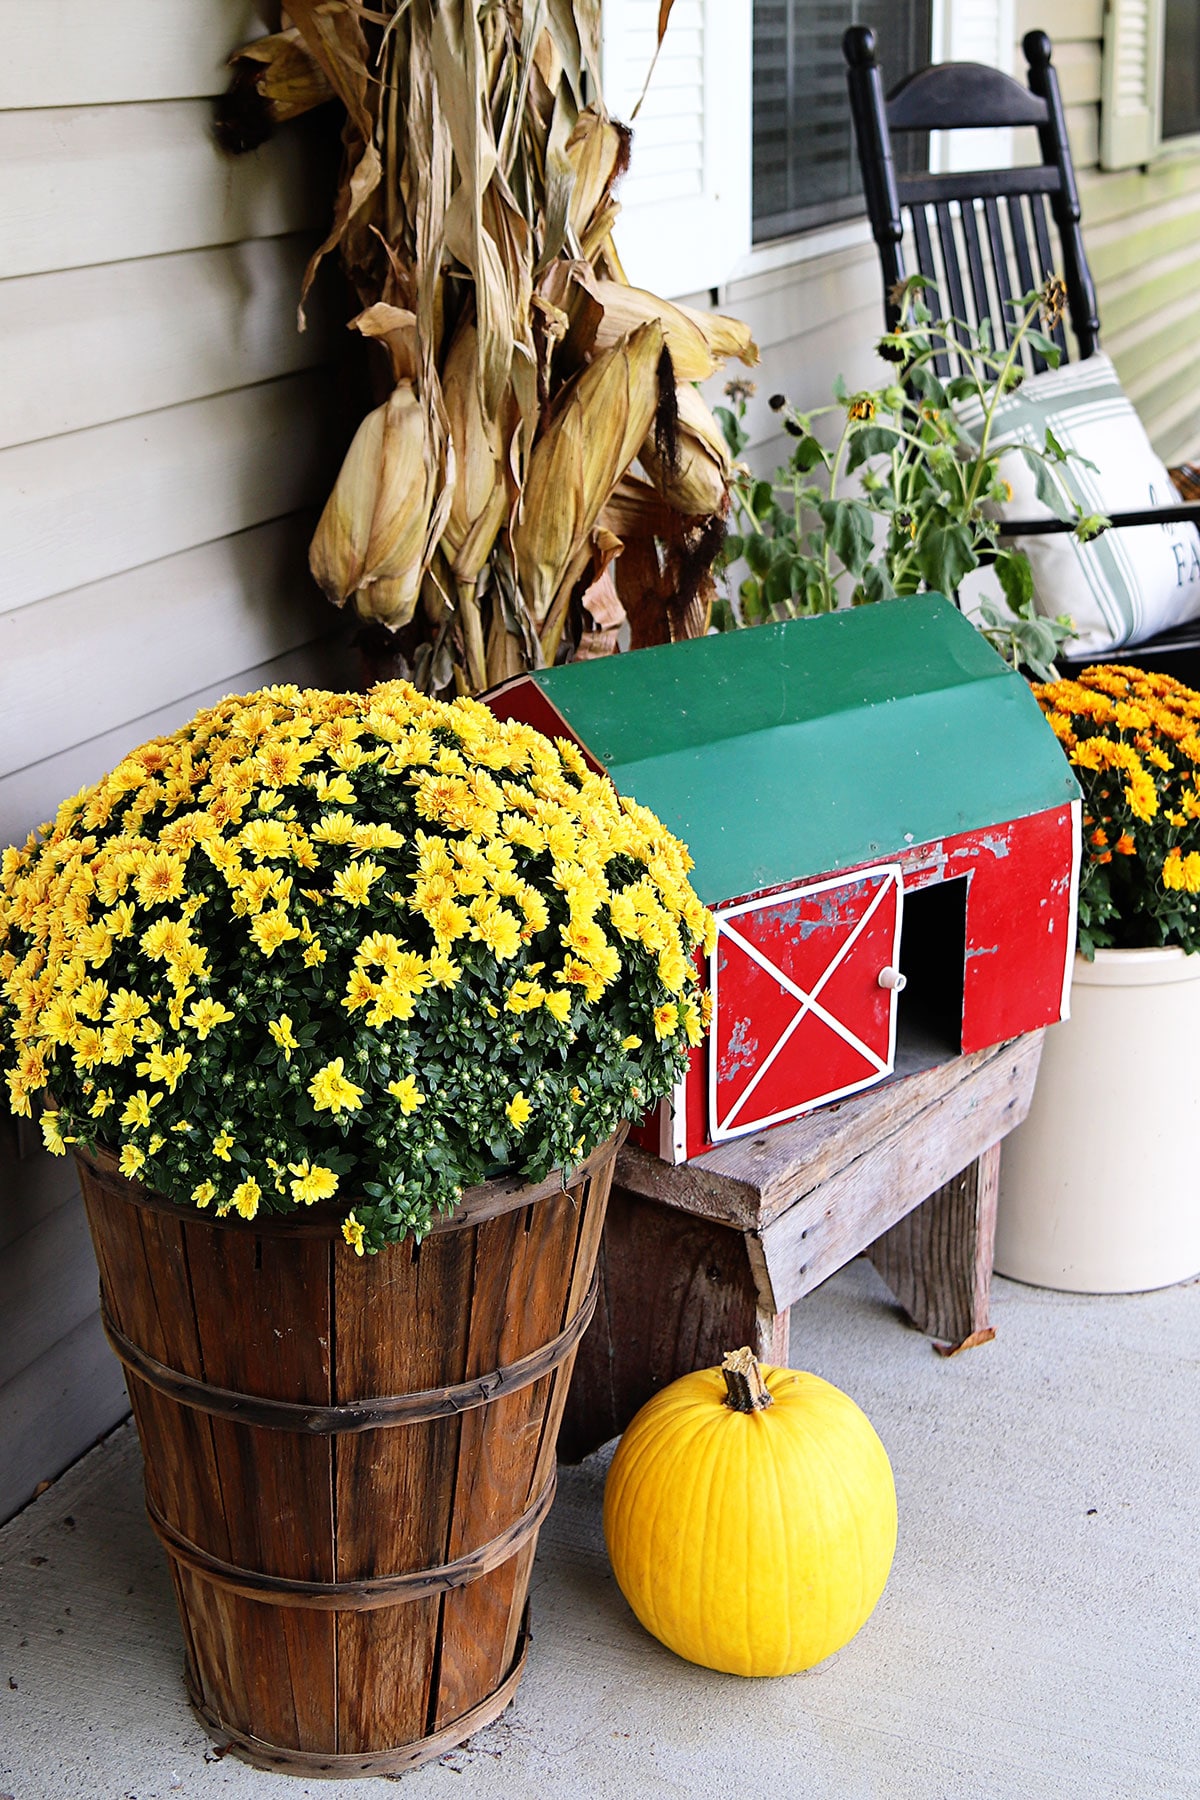 Fall porch decor with a yellow pumpkin, bushel basket with a yellow mum and a handmade toy sized red barn.